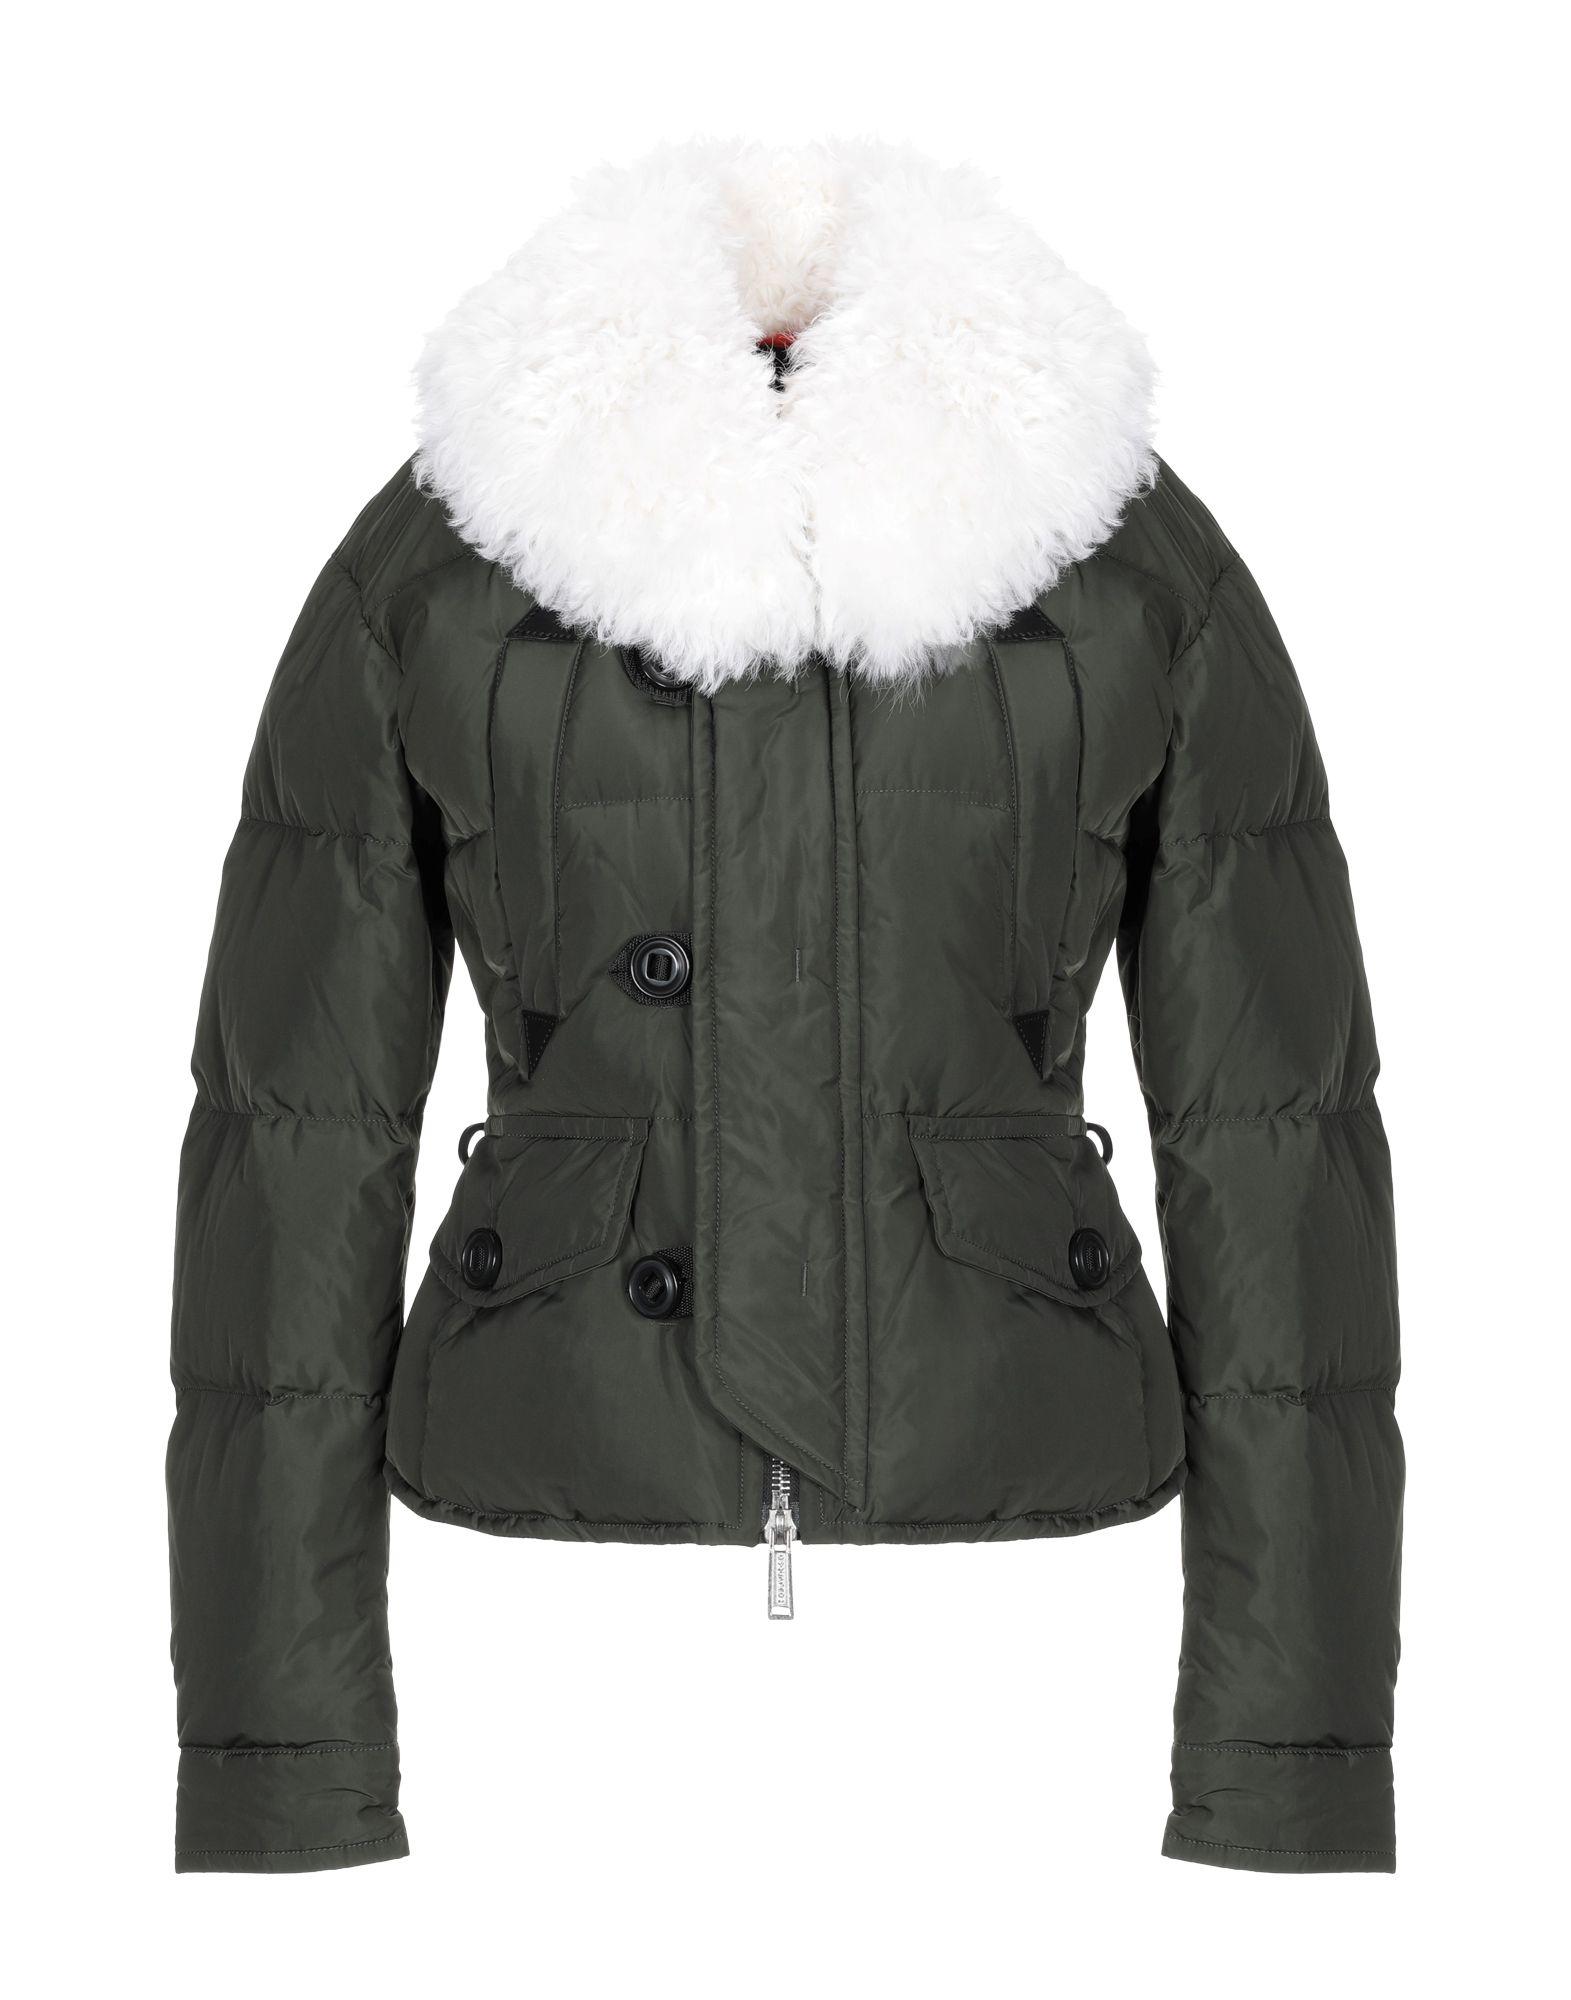 DSquared² Synthetic Down Jacket in Dark Green (Green) - Lyst